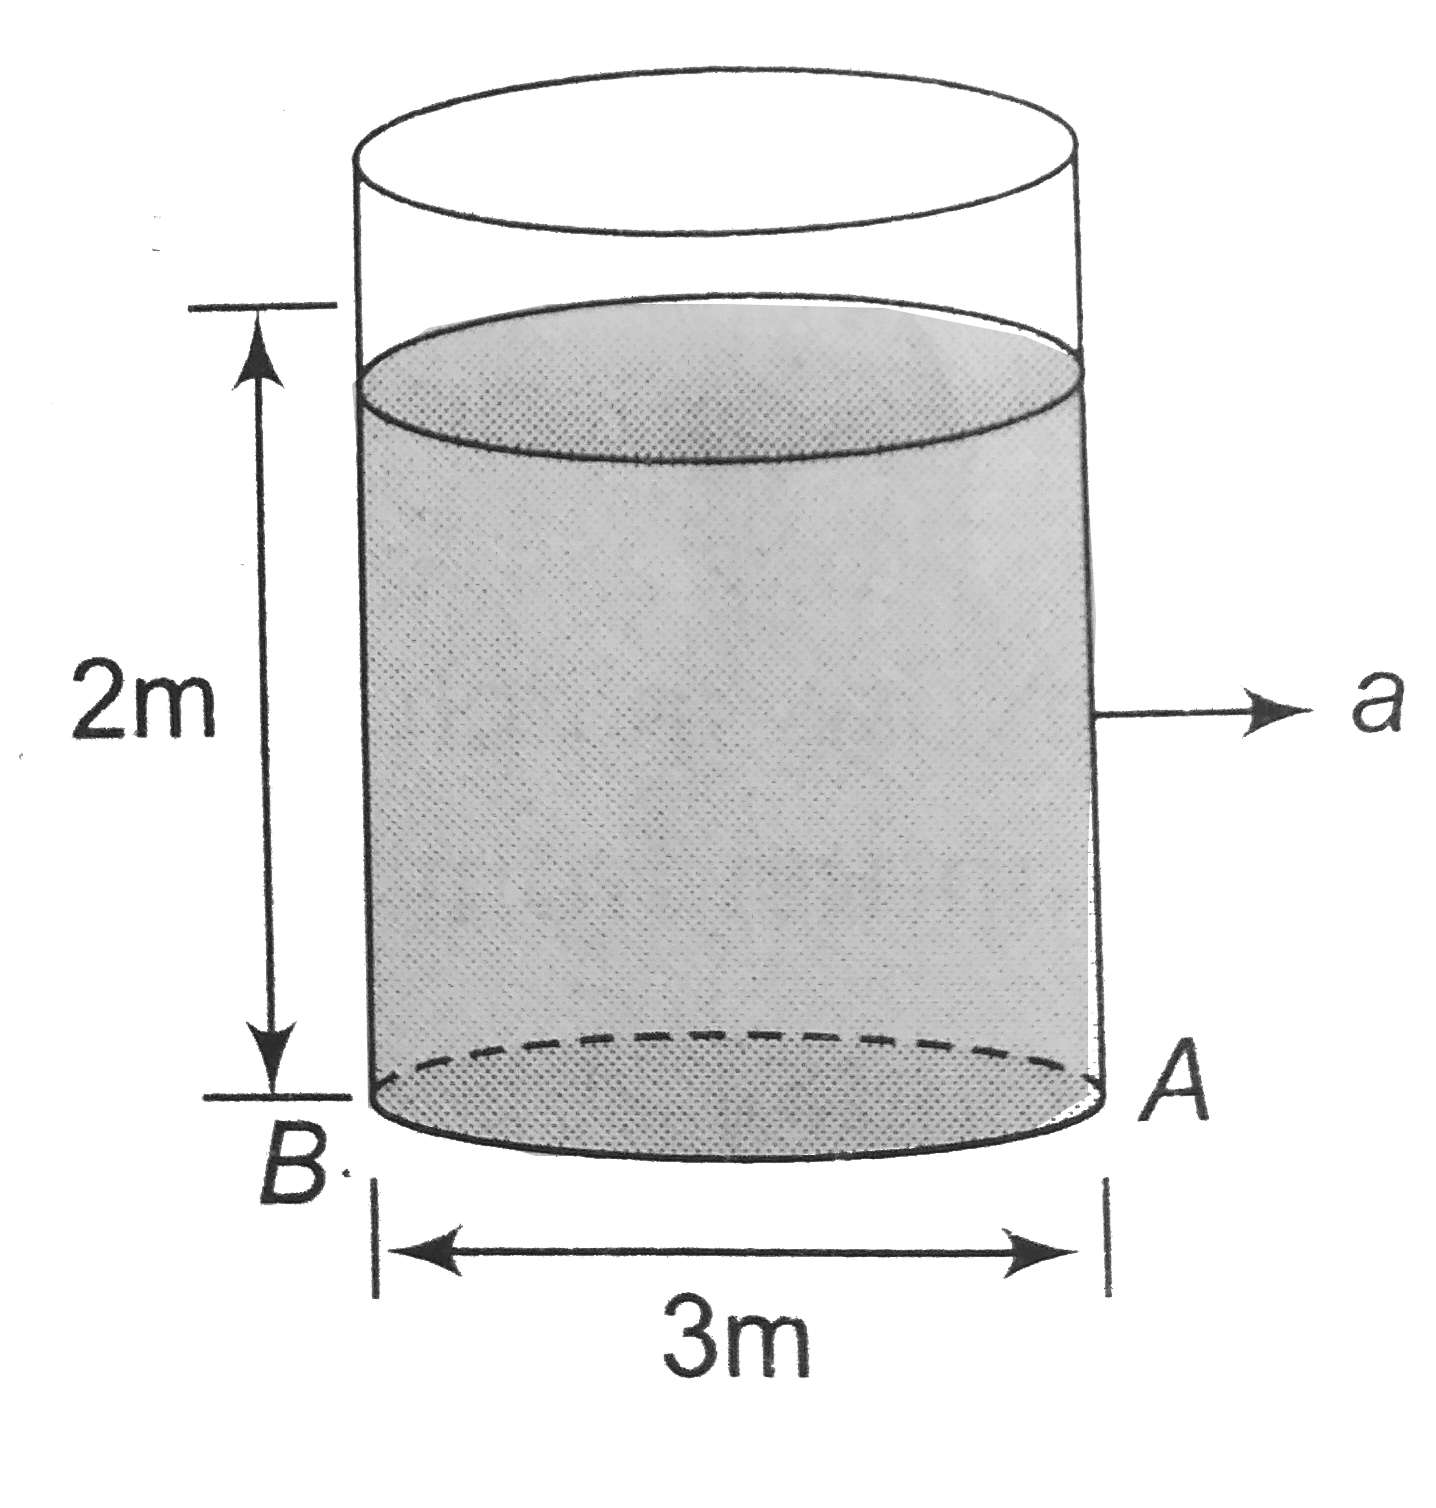 The minimum horizontal acceleration of the container4 so that pressure at the point A of the container becomes atmospheric is (The tank is of sufficient height)